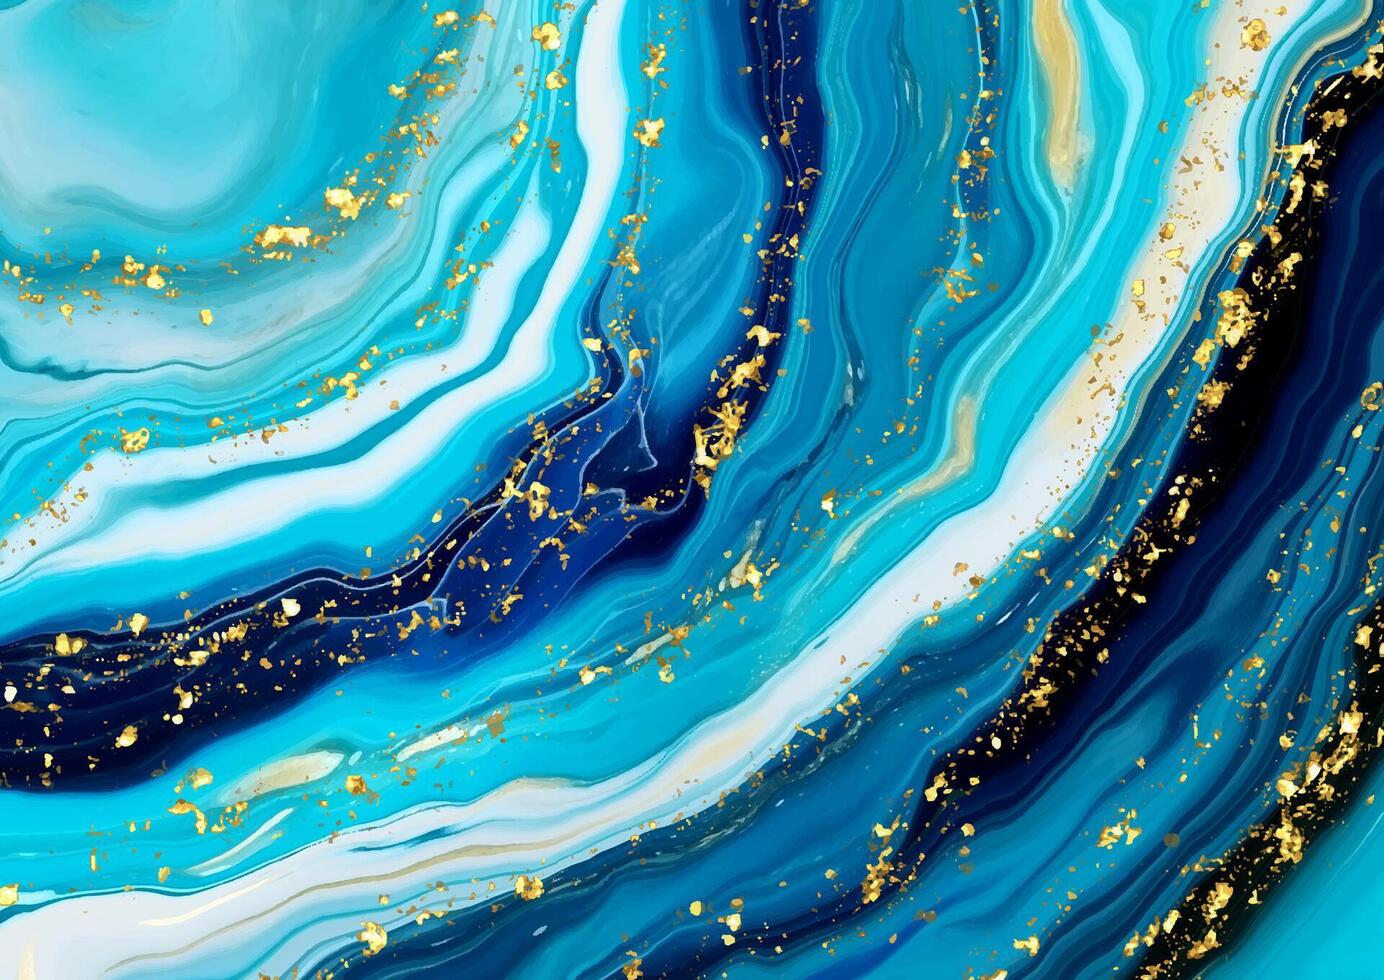 hand painted liquid marble design in teal and blue colours with gold glitter elements vector